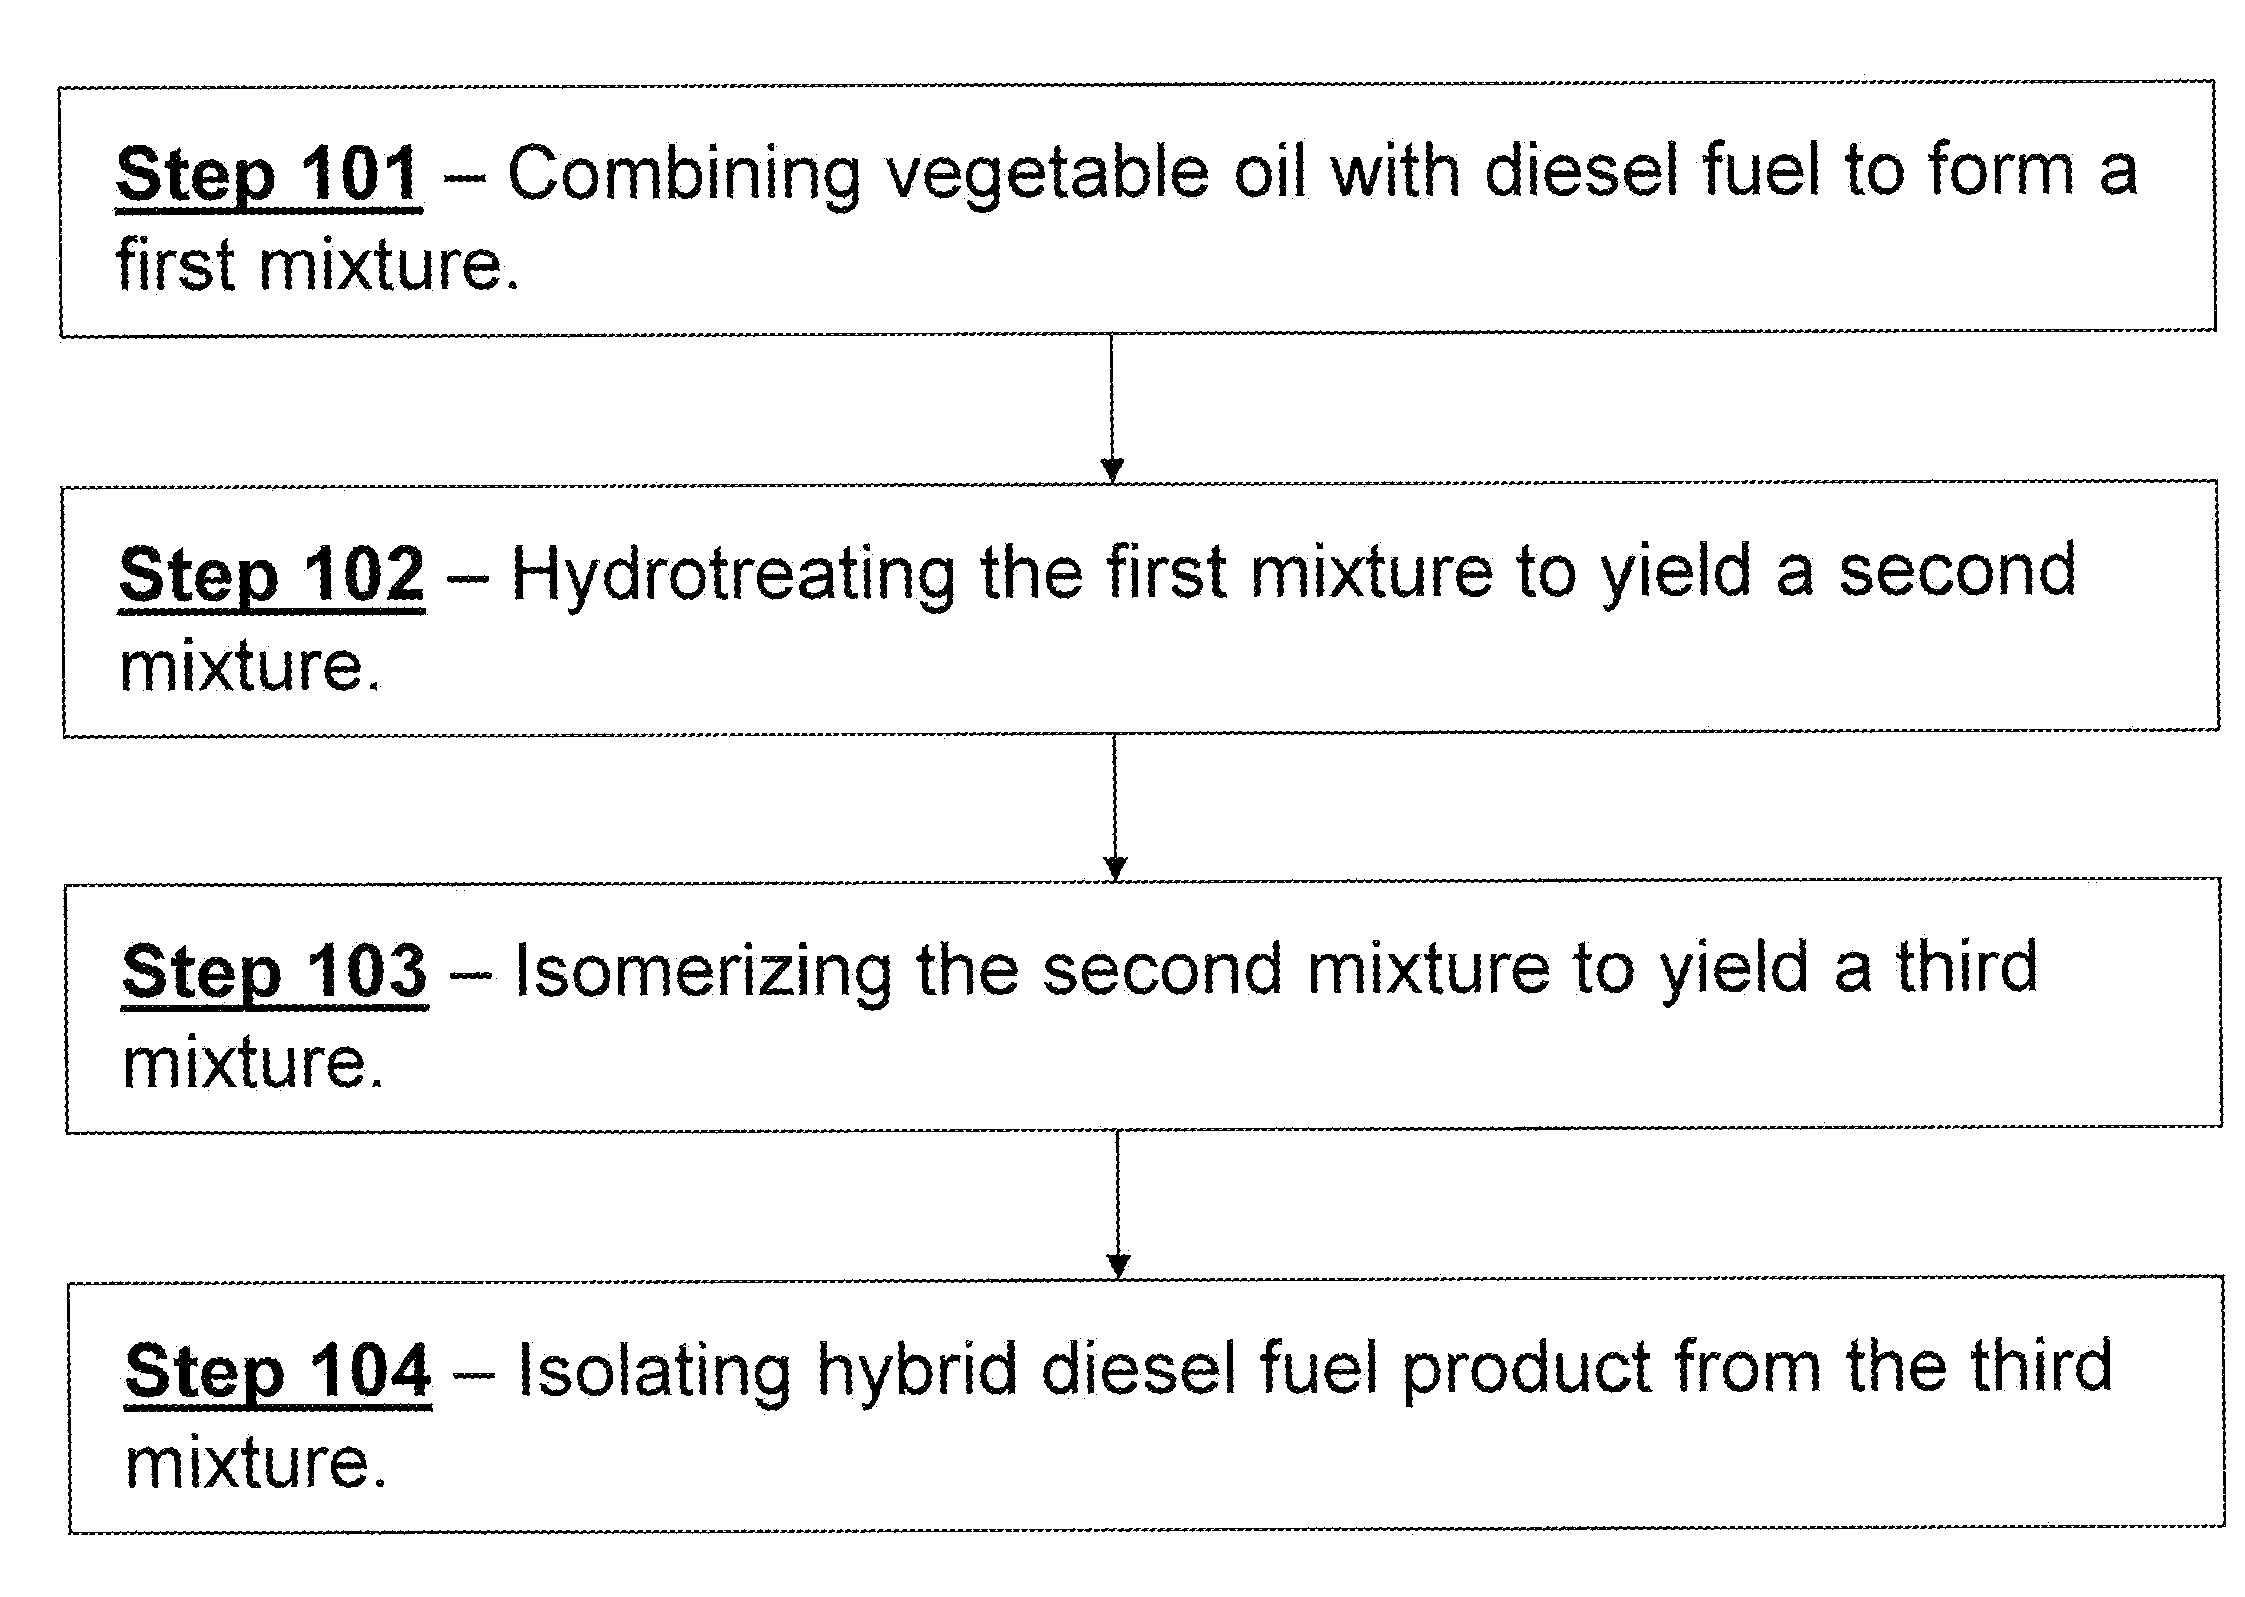 Co-processing diesel fuel with vegetable oil to generate a low cloud point hybrid diesel biofuel